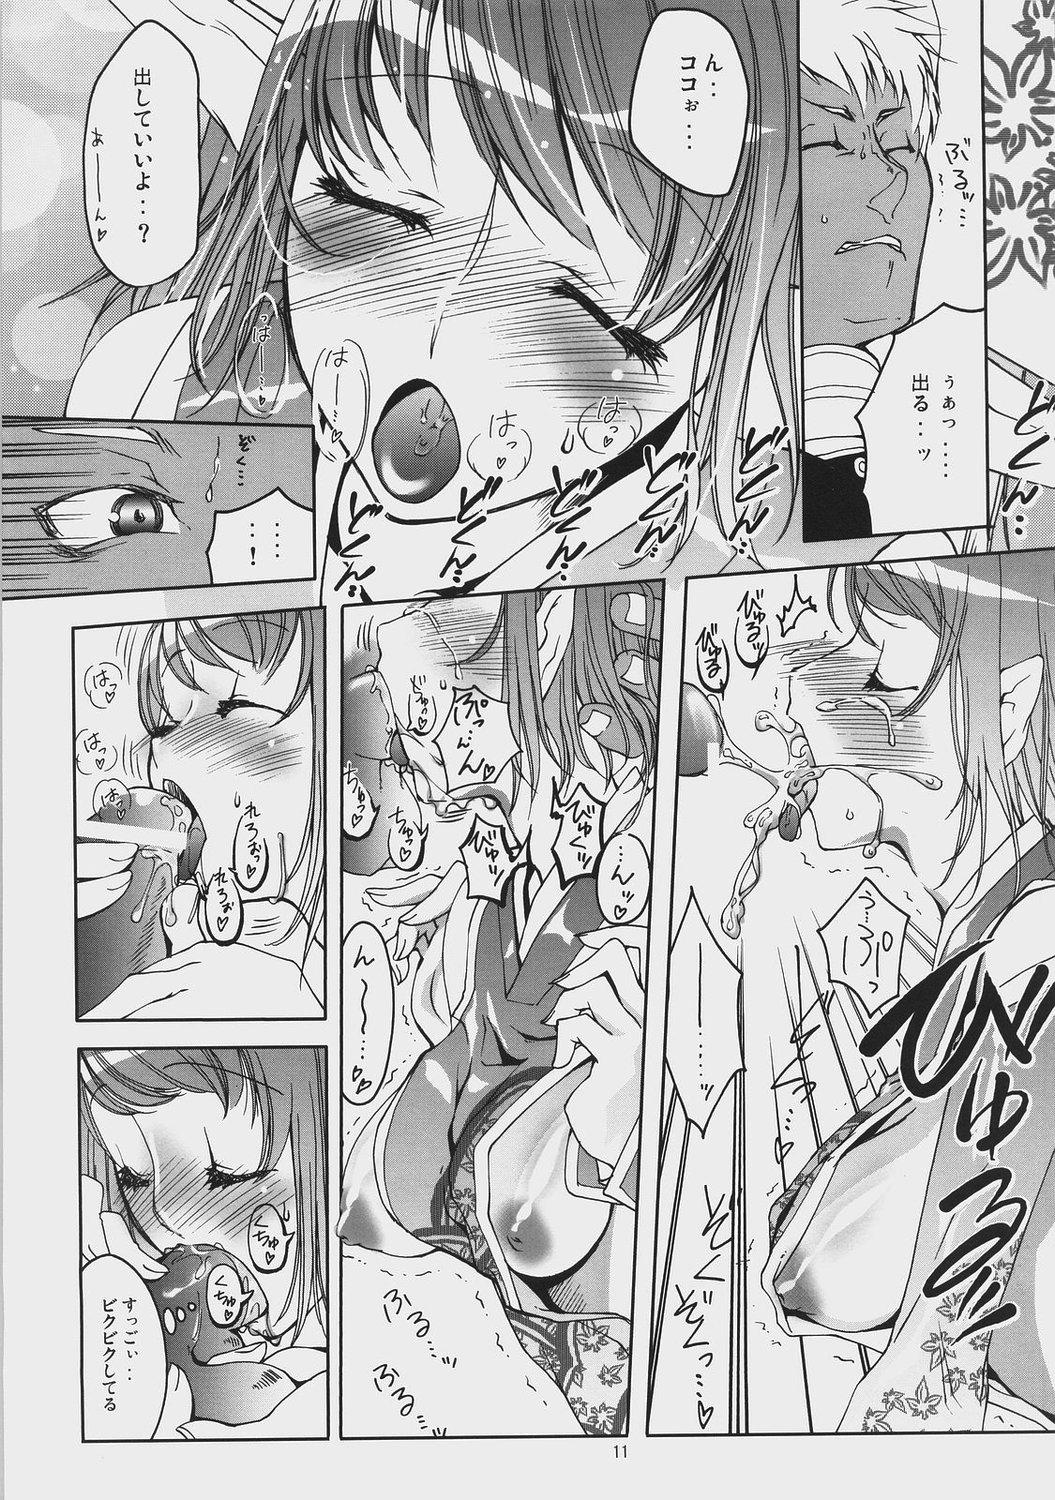 Public Nudity Beauty and the Beast - Phantasy star universe Motel - Page 10